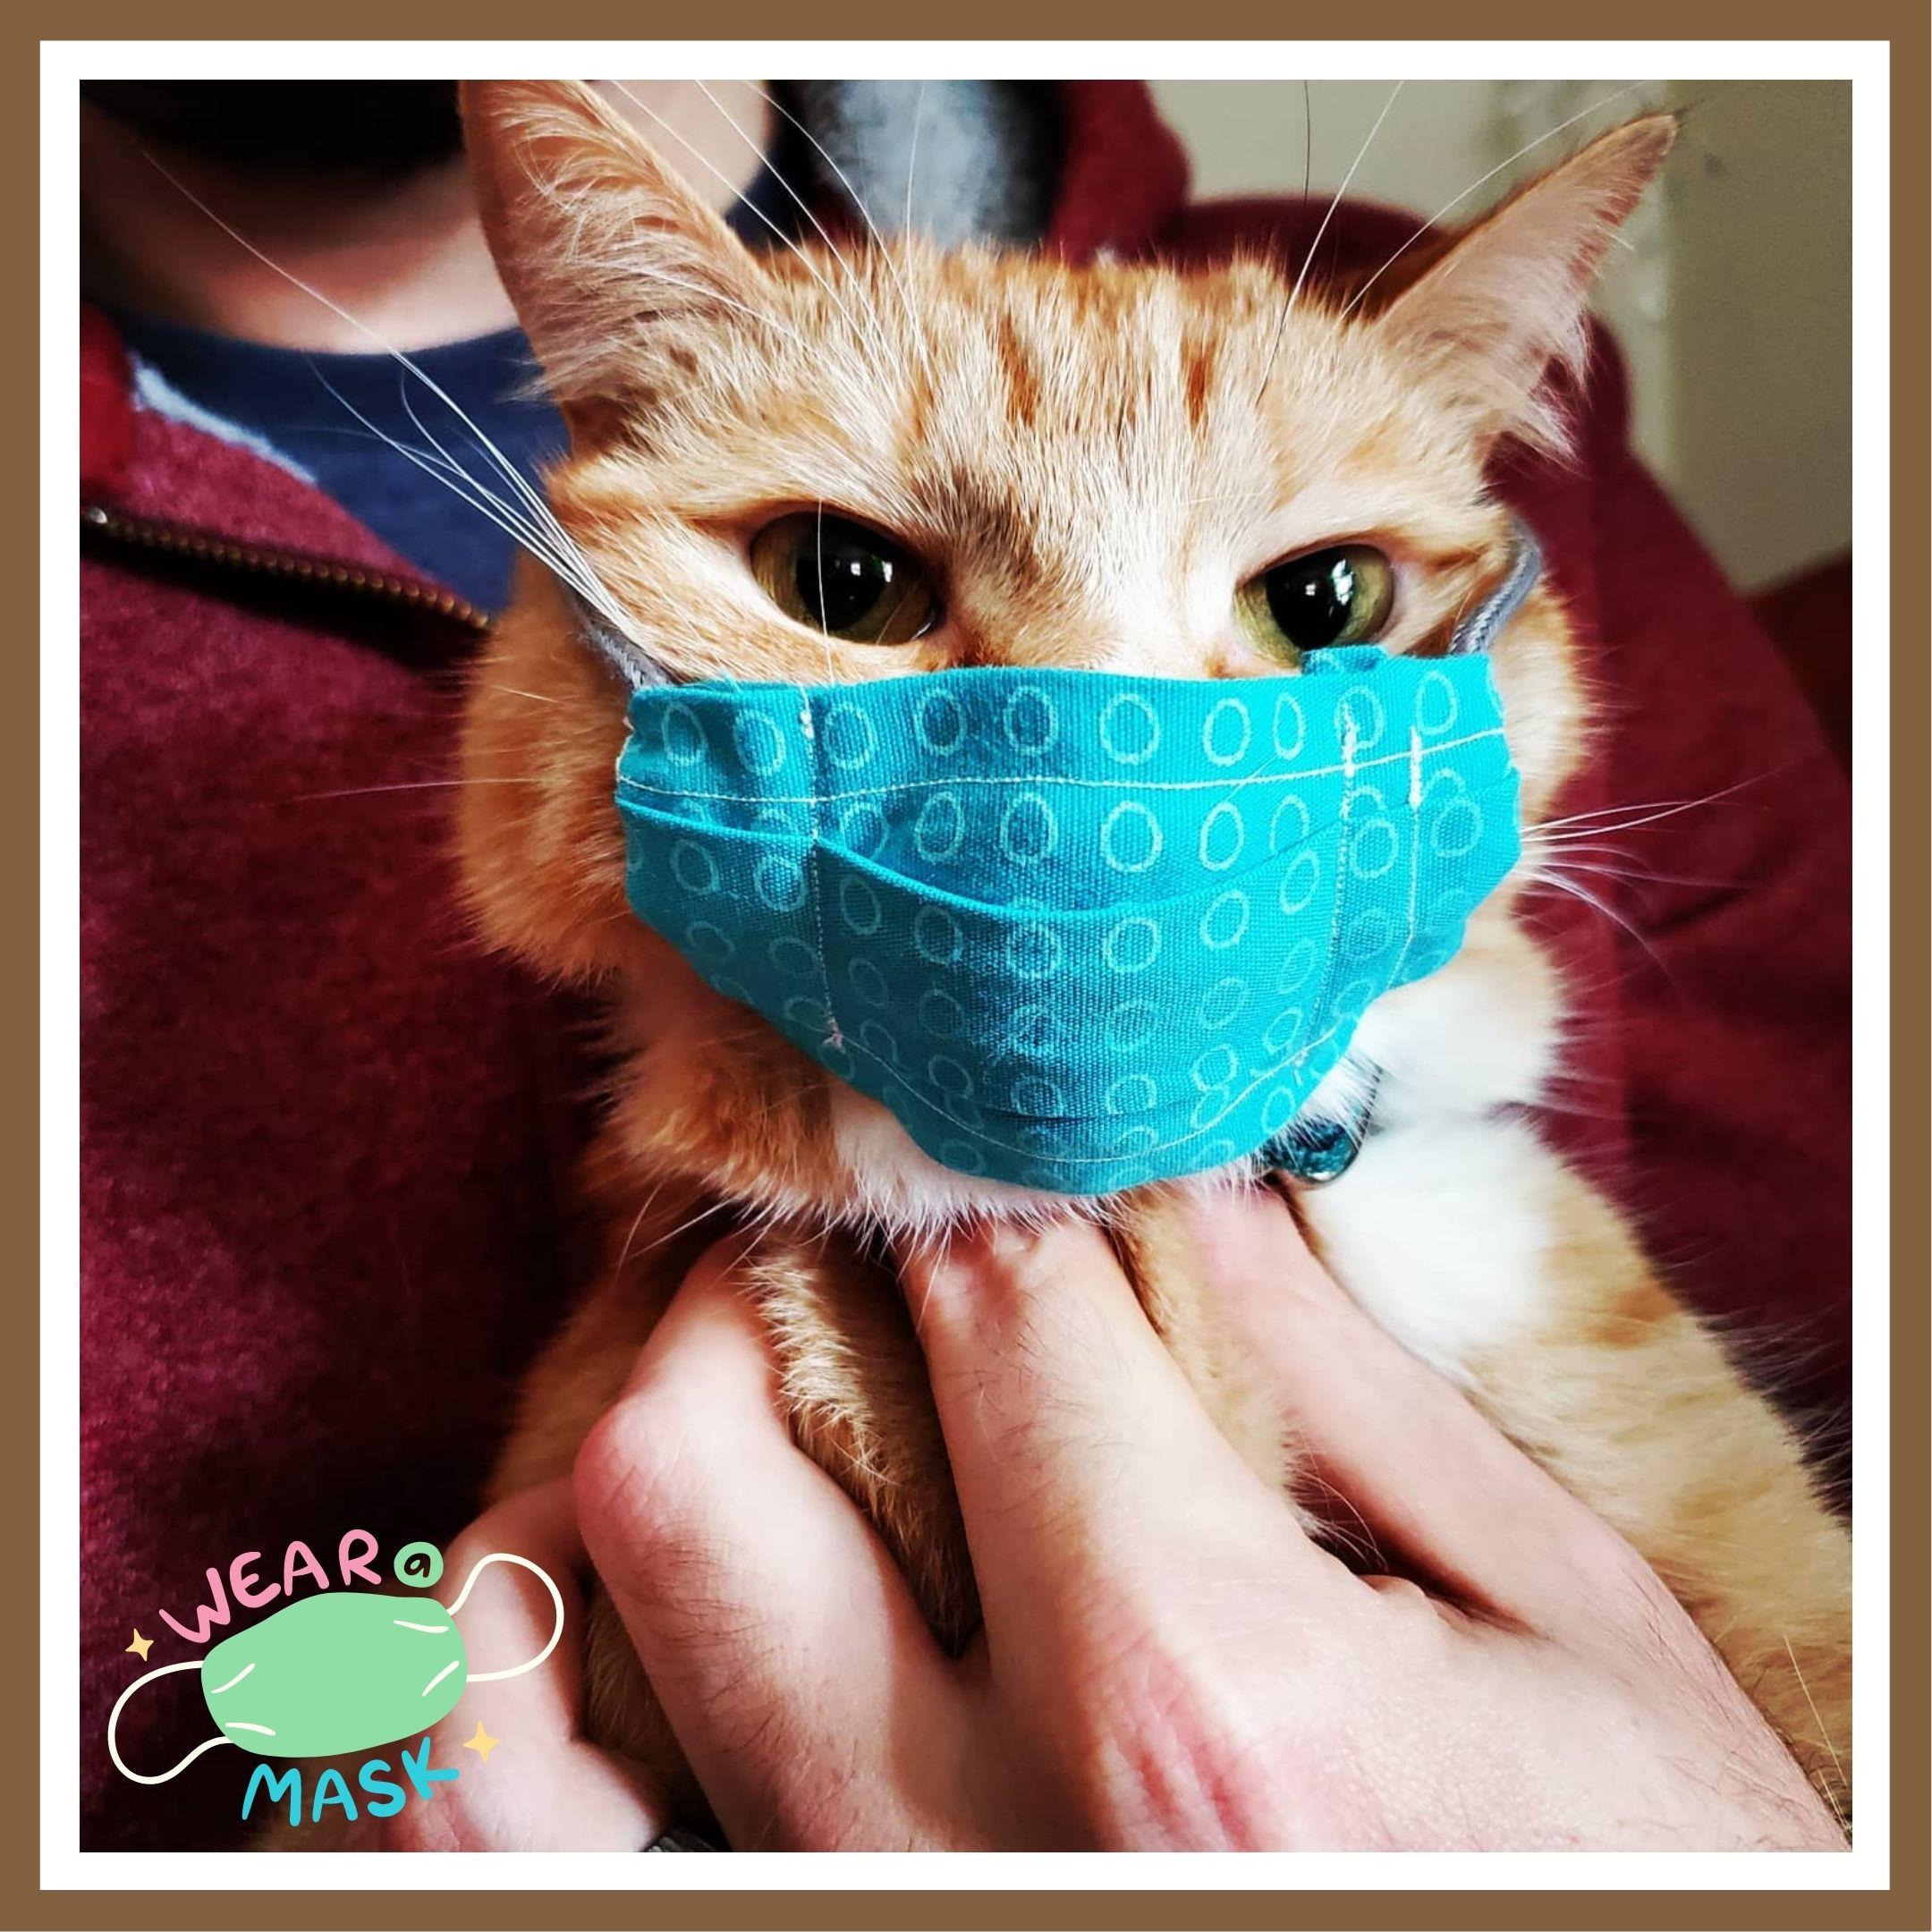 Peach the cat showing how to properly wear a mask covering your nose and mouth